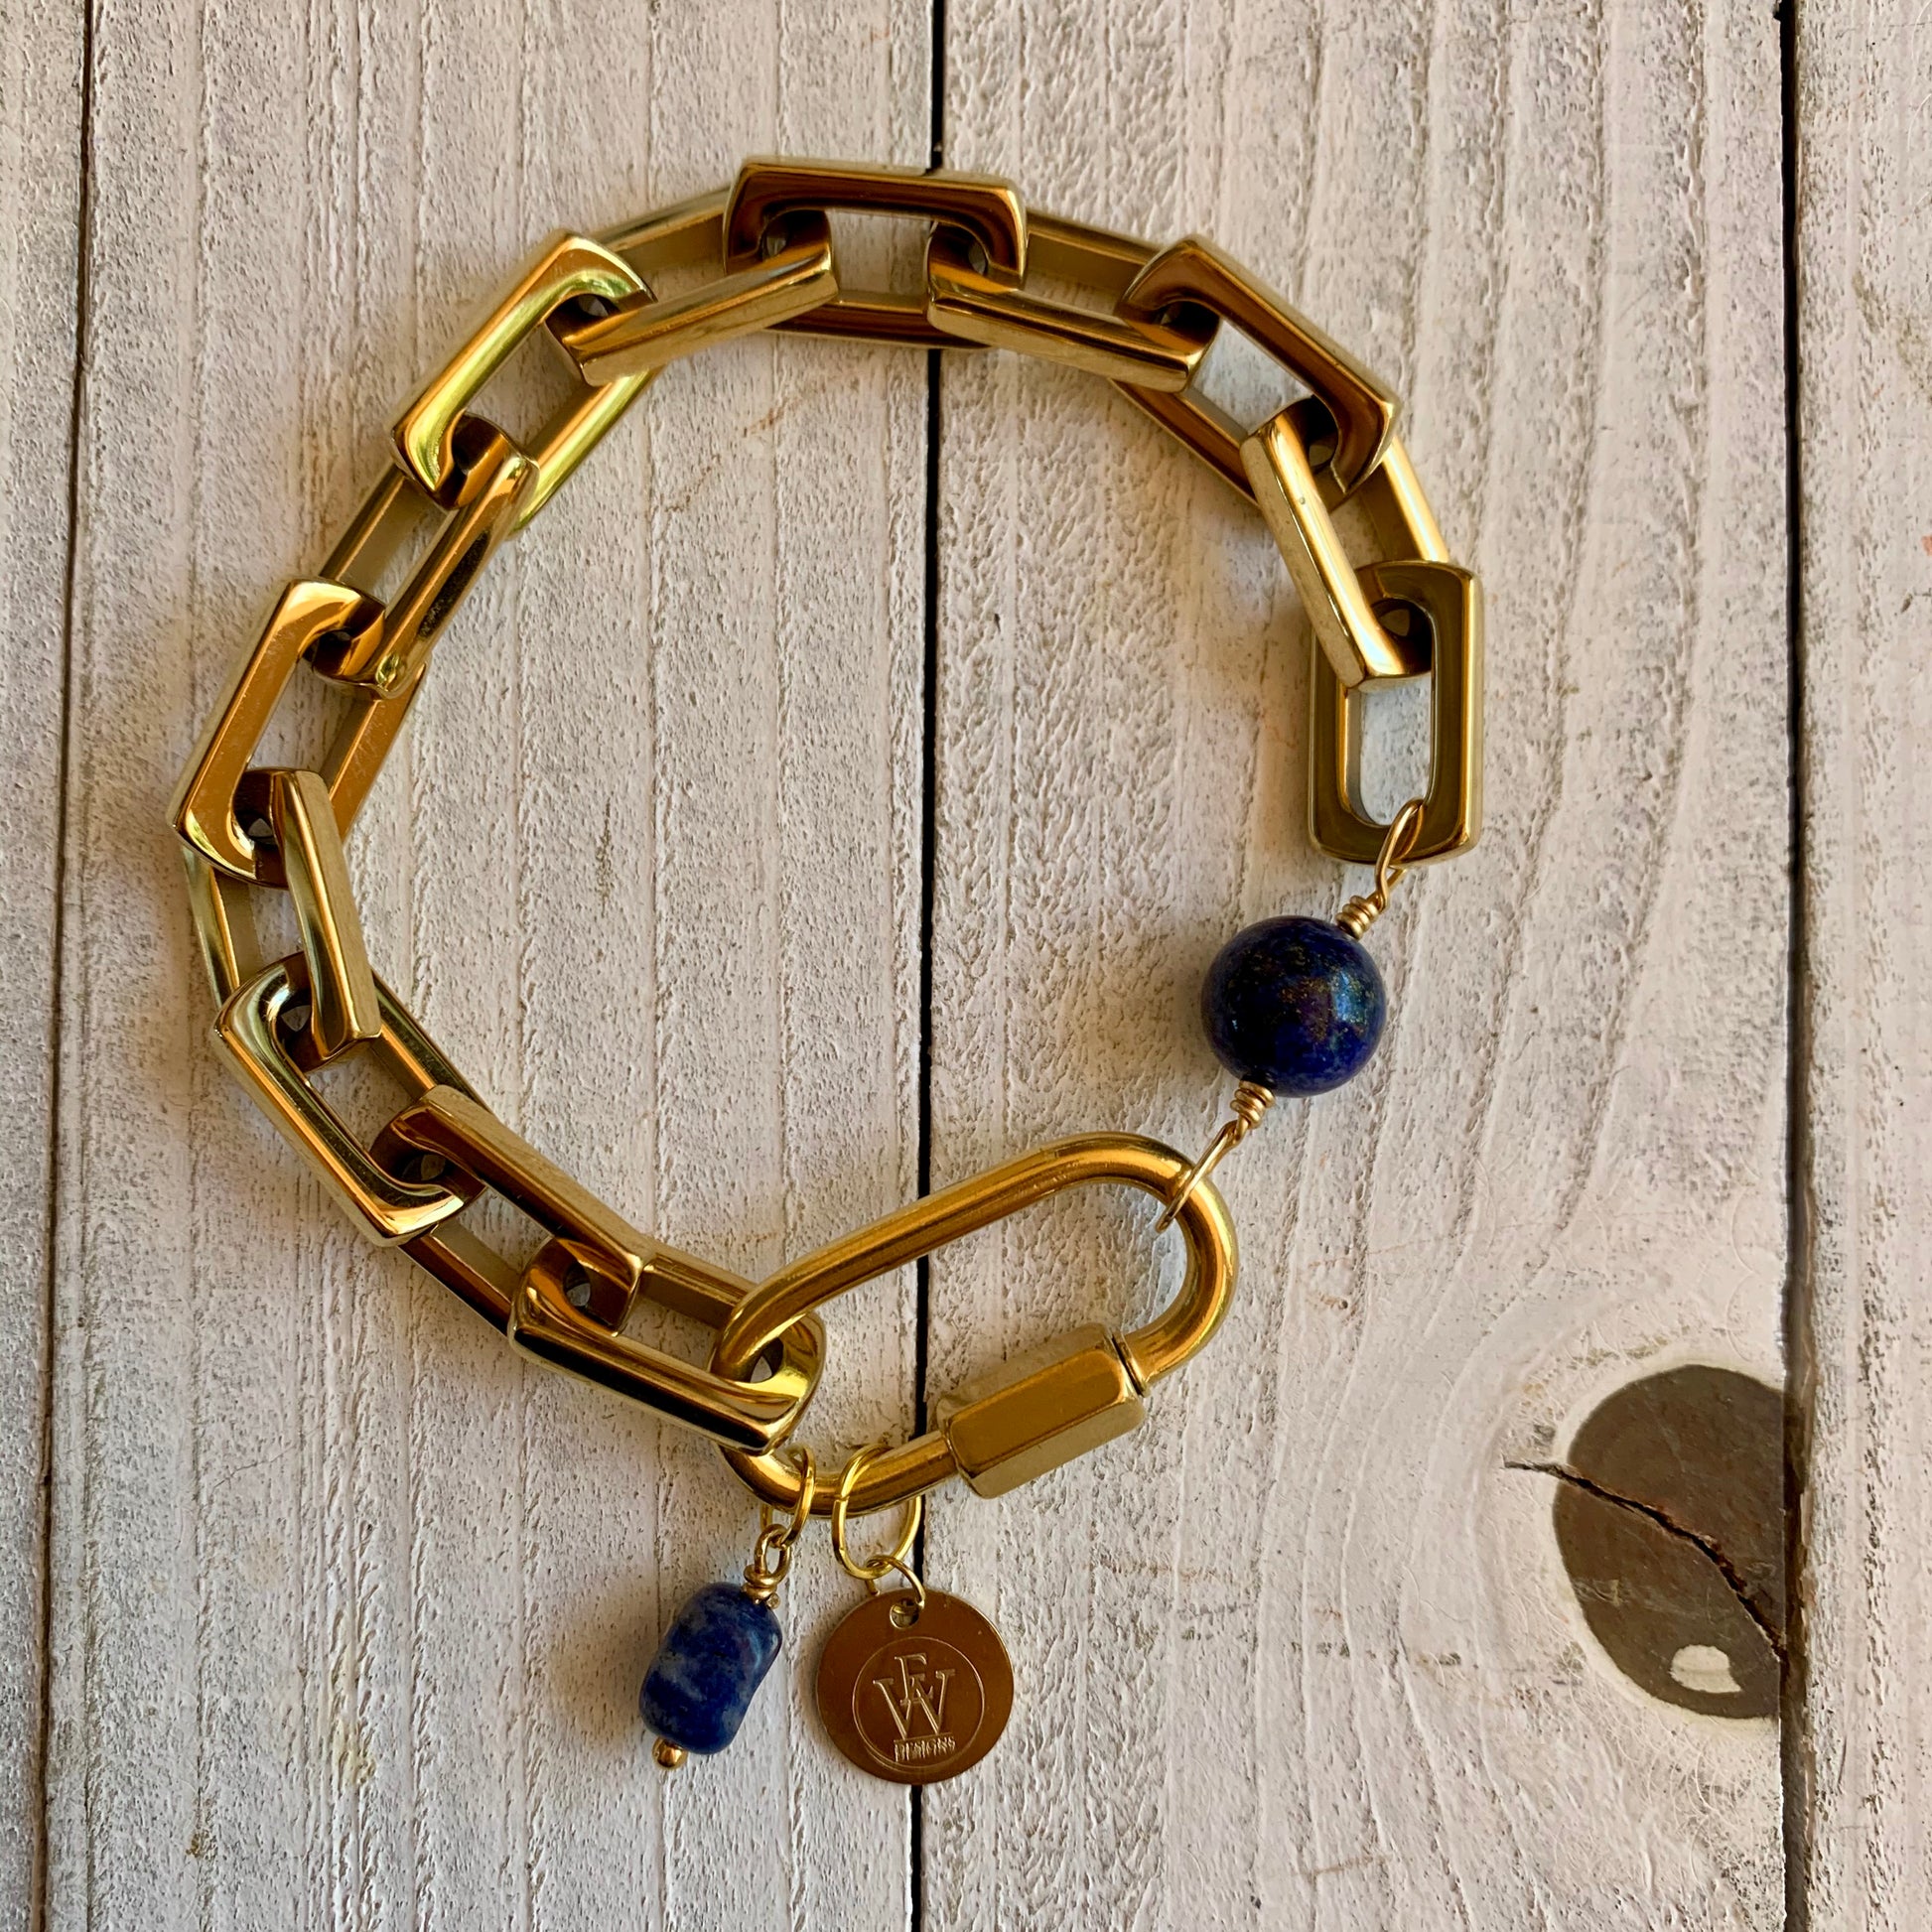 18k Gold Plated Chain Link Bracelet with Lapis Lazuli beads